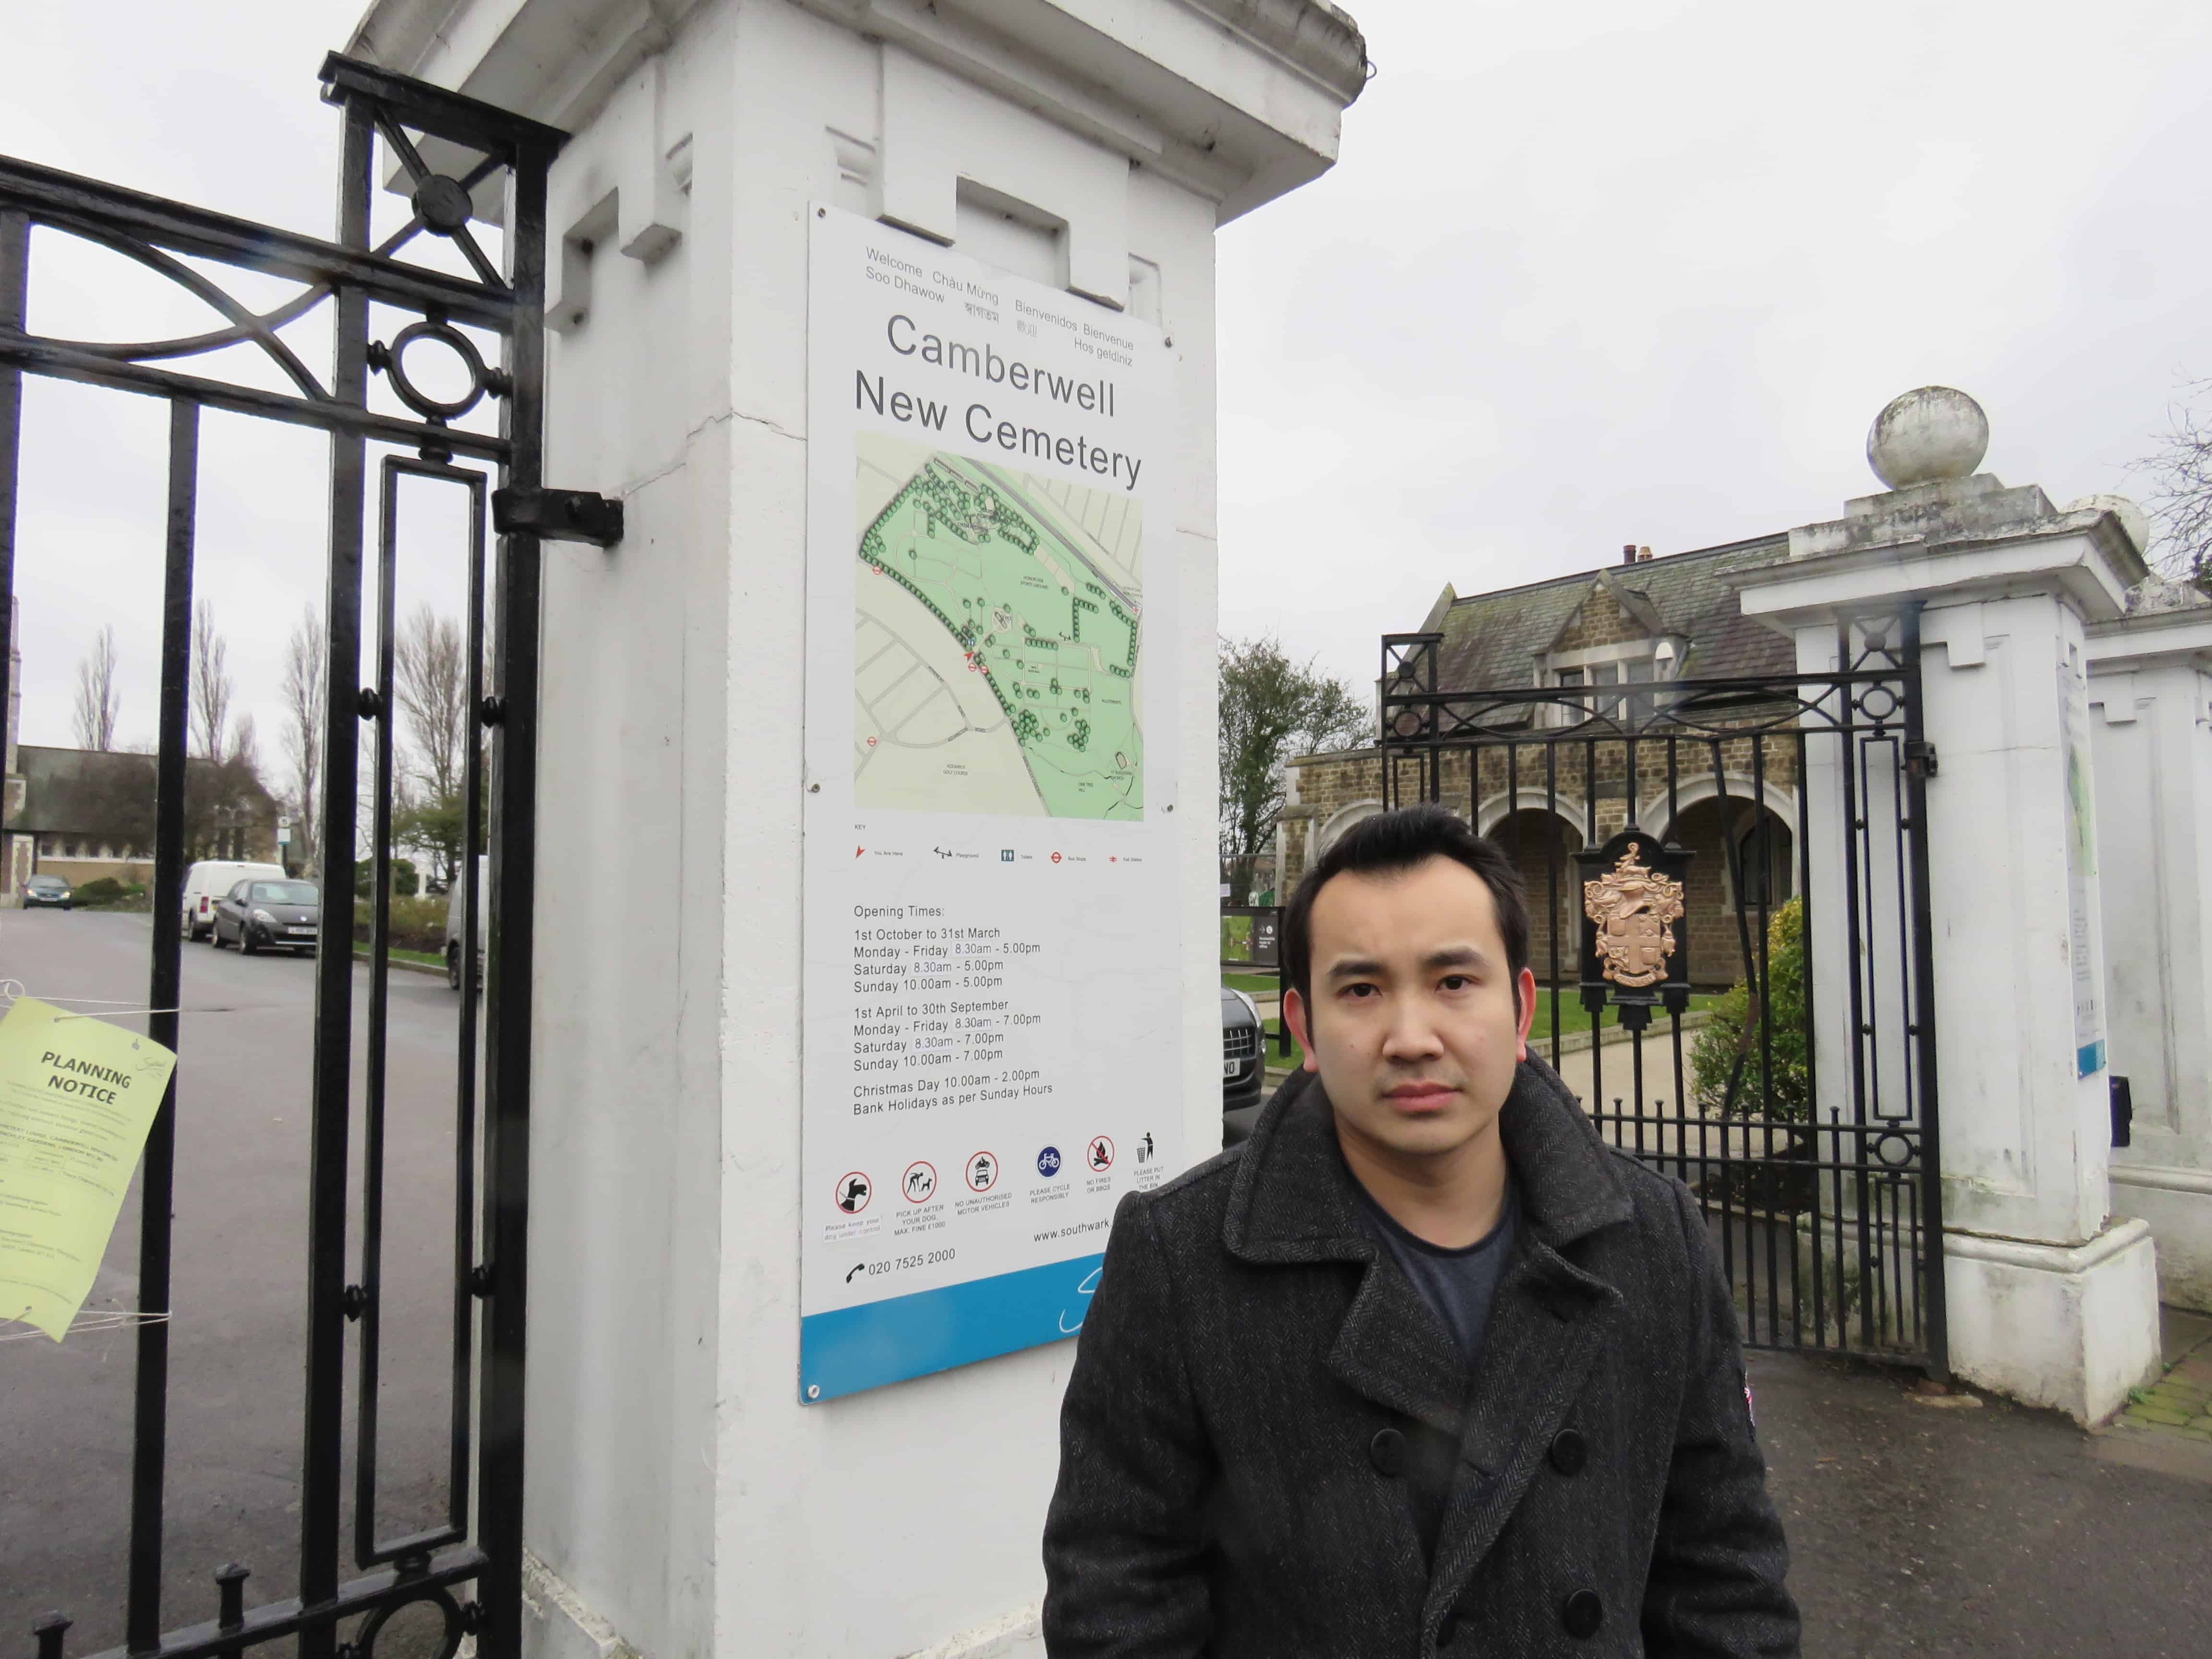 Tim Ung, outside Camberwell New Cemetery